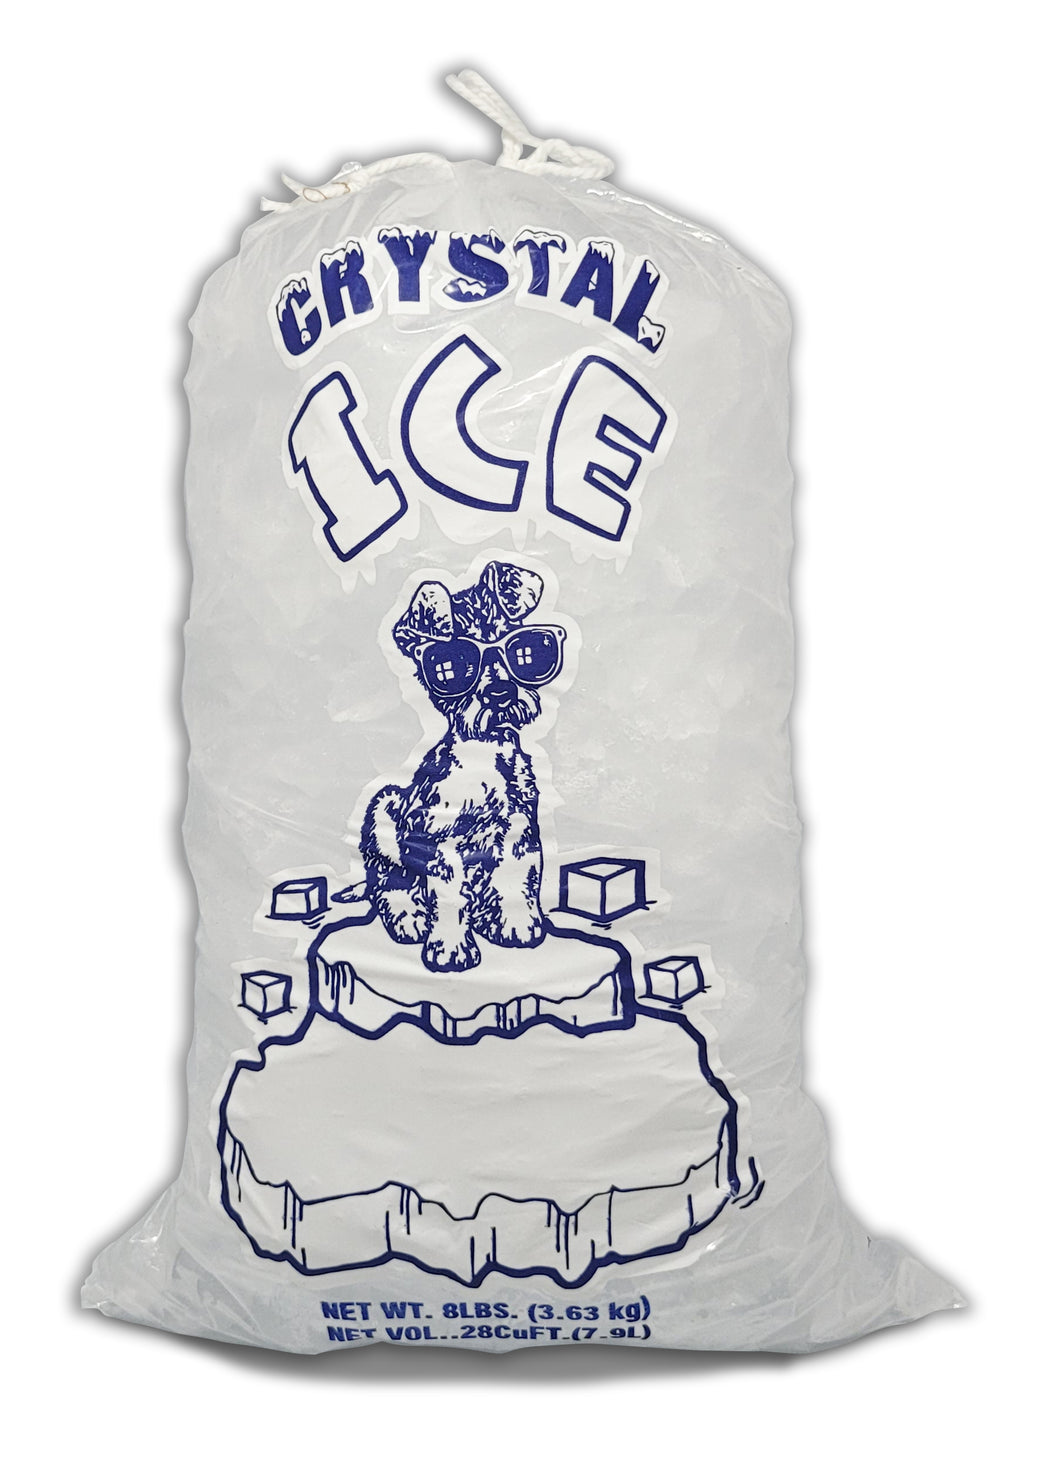 ICE N COLD Crystal Clear Plastic Ice Bags with Cotton Drawstring for Ice Storage and Transport